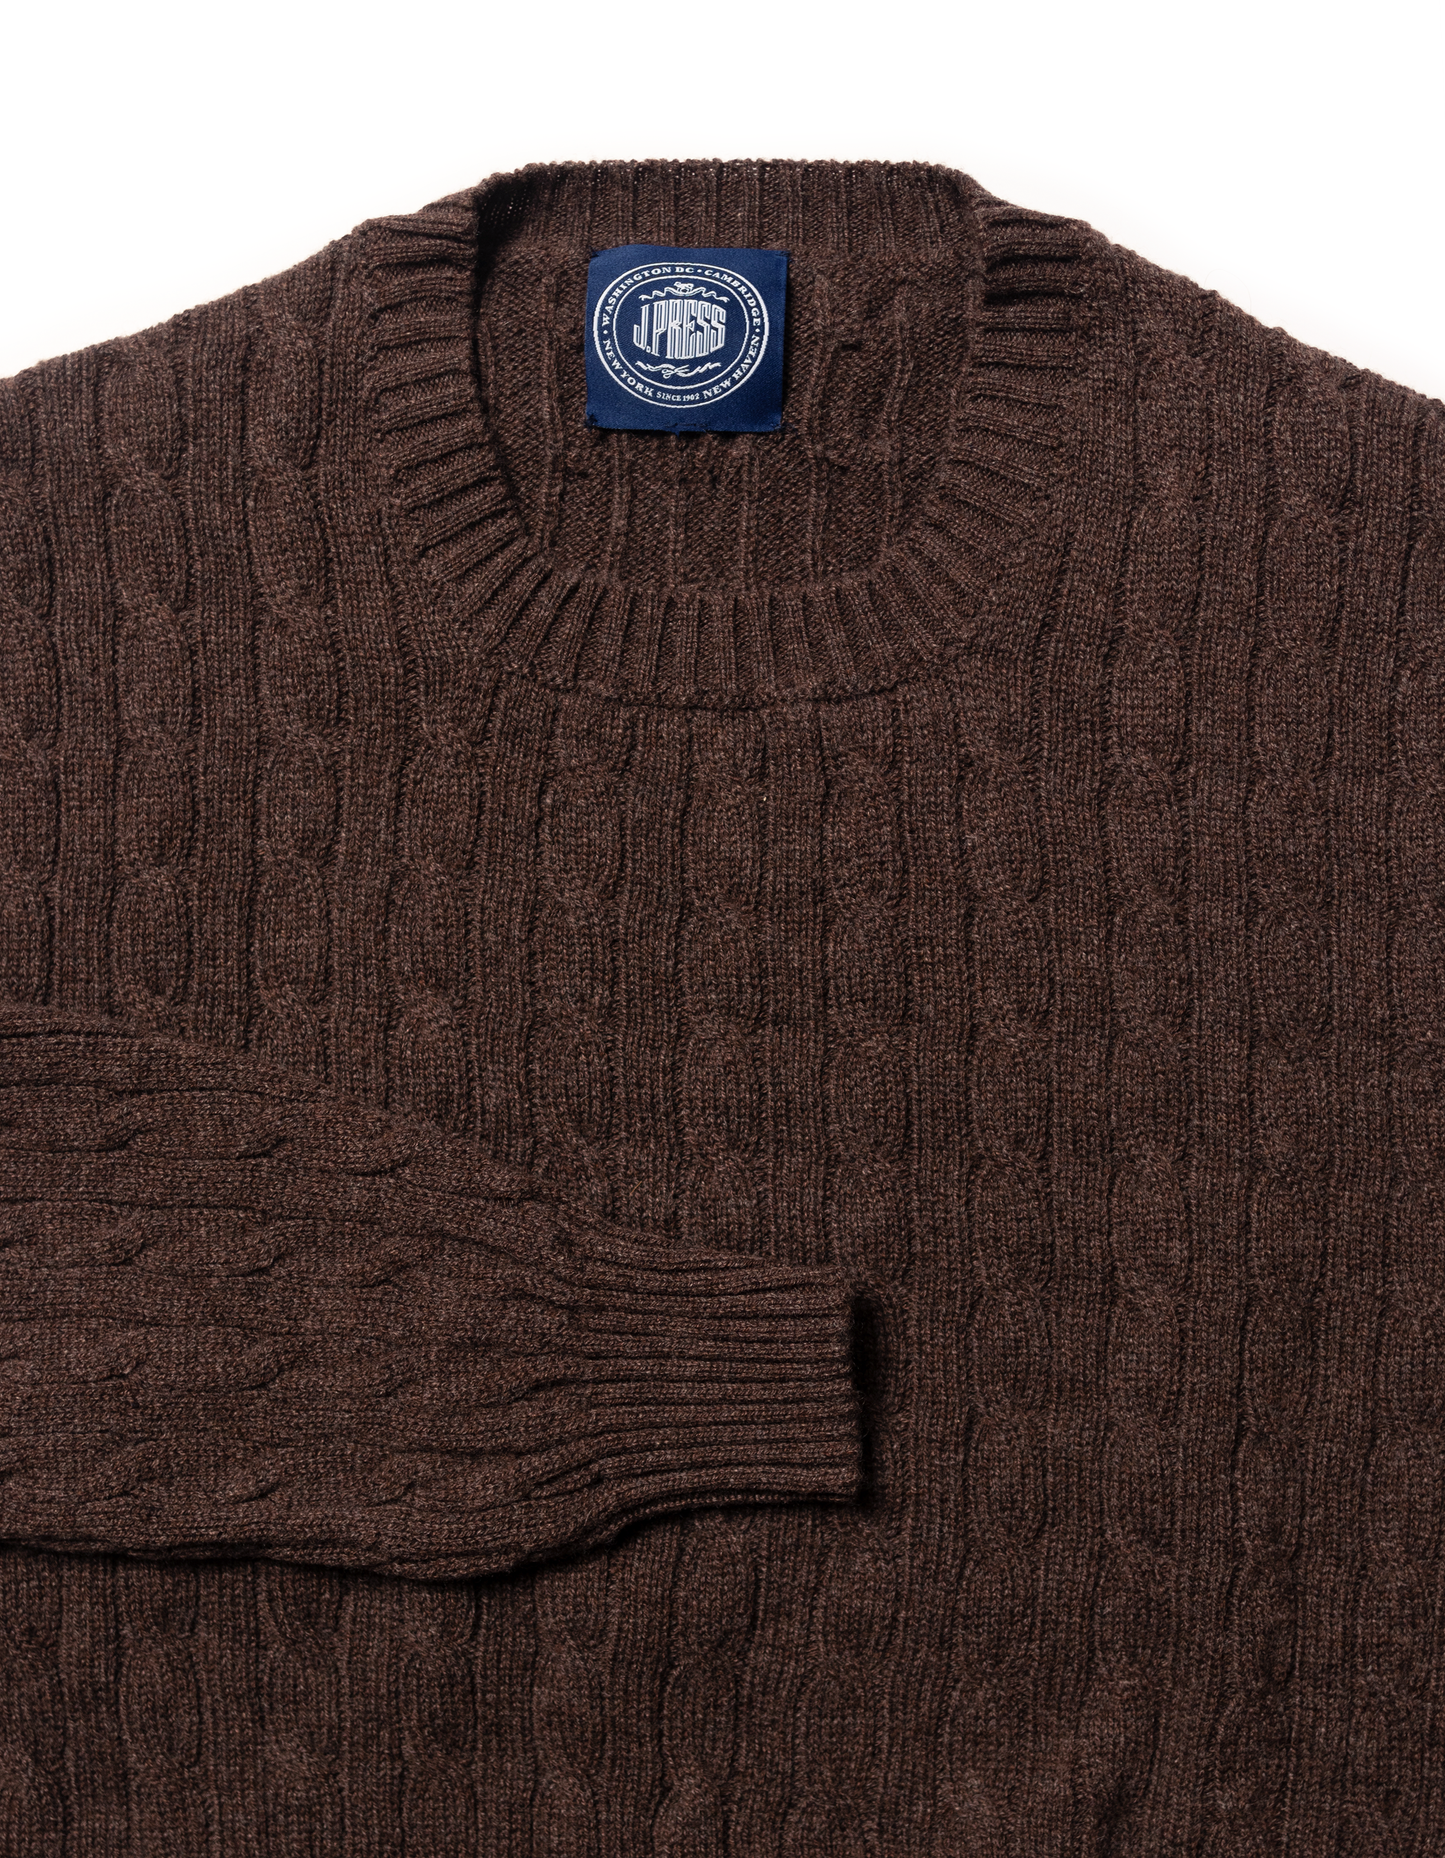 DARK BROWN CASHMERE CABLE